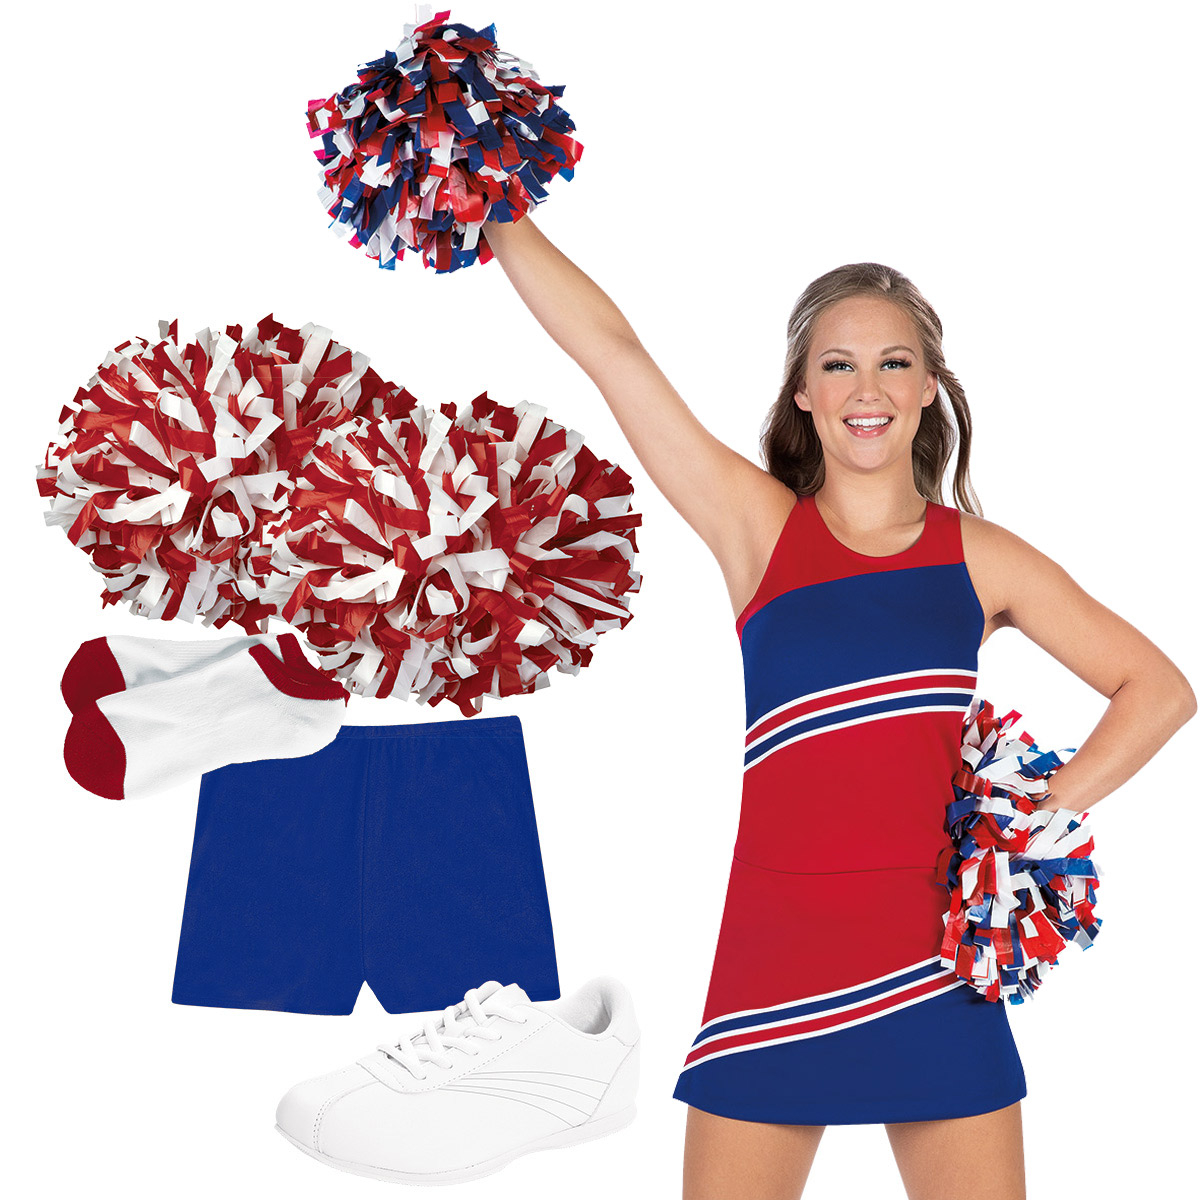 High Quality Cheerleading Uniforms, Cheer Uniform  Packages, Cheer Shoes, Cheerleader Accessories, Cheer Bags, Poms, Campwear,  Cheerleader Apparel, Dance Apparel, Face Masks & more.